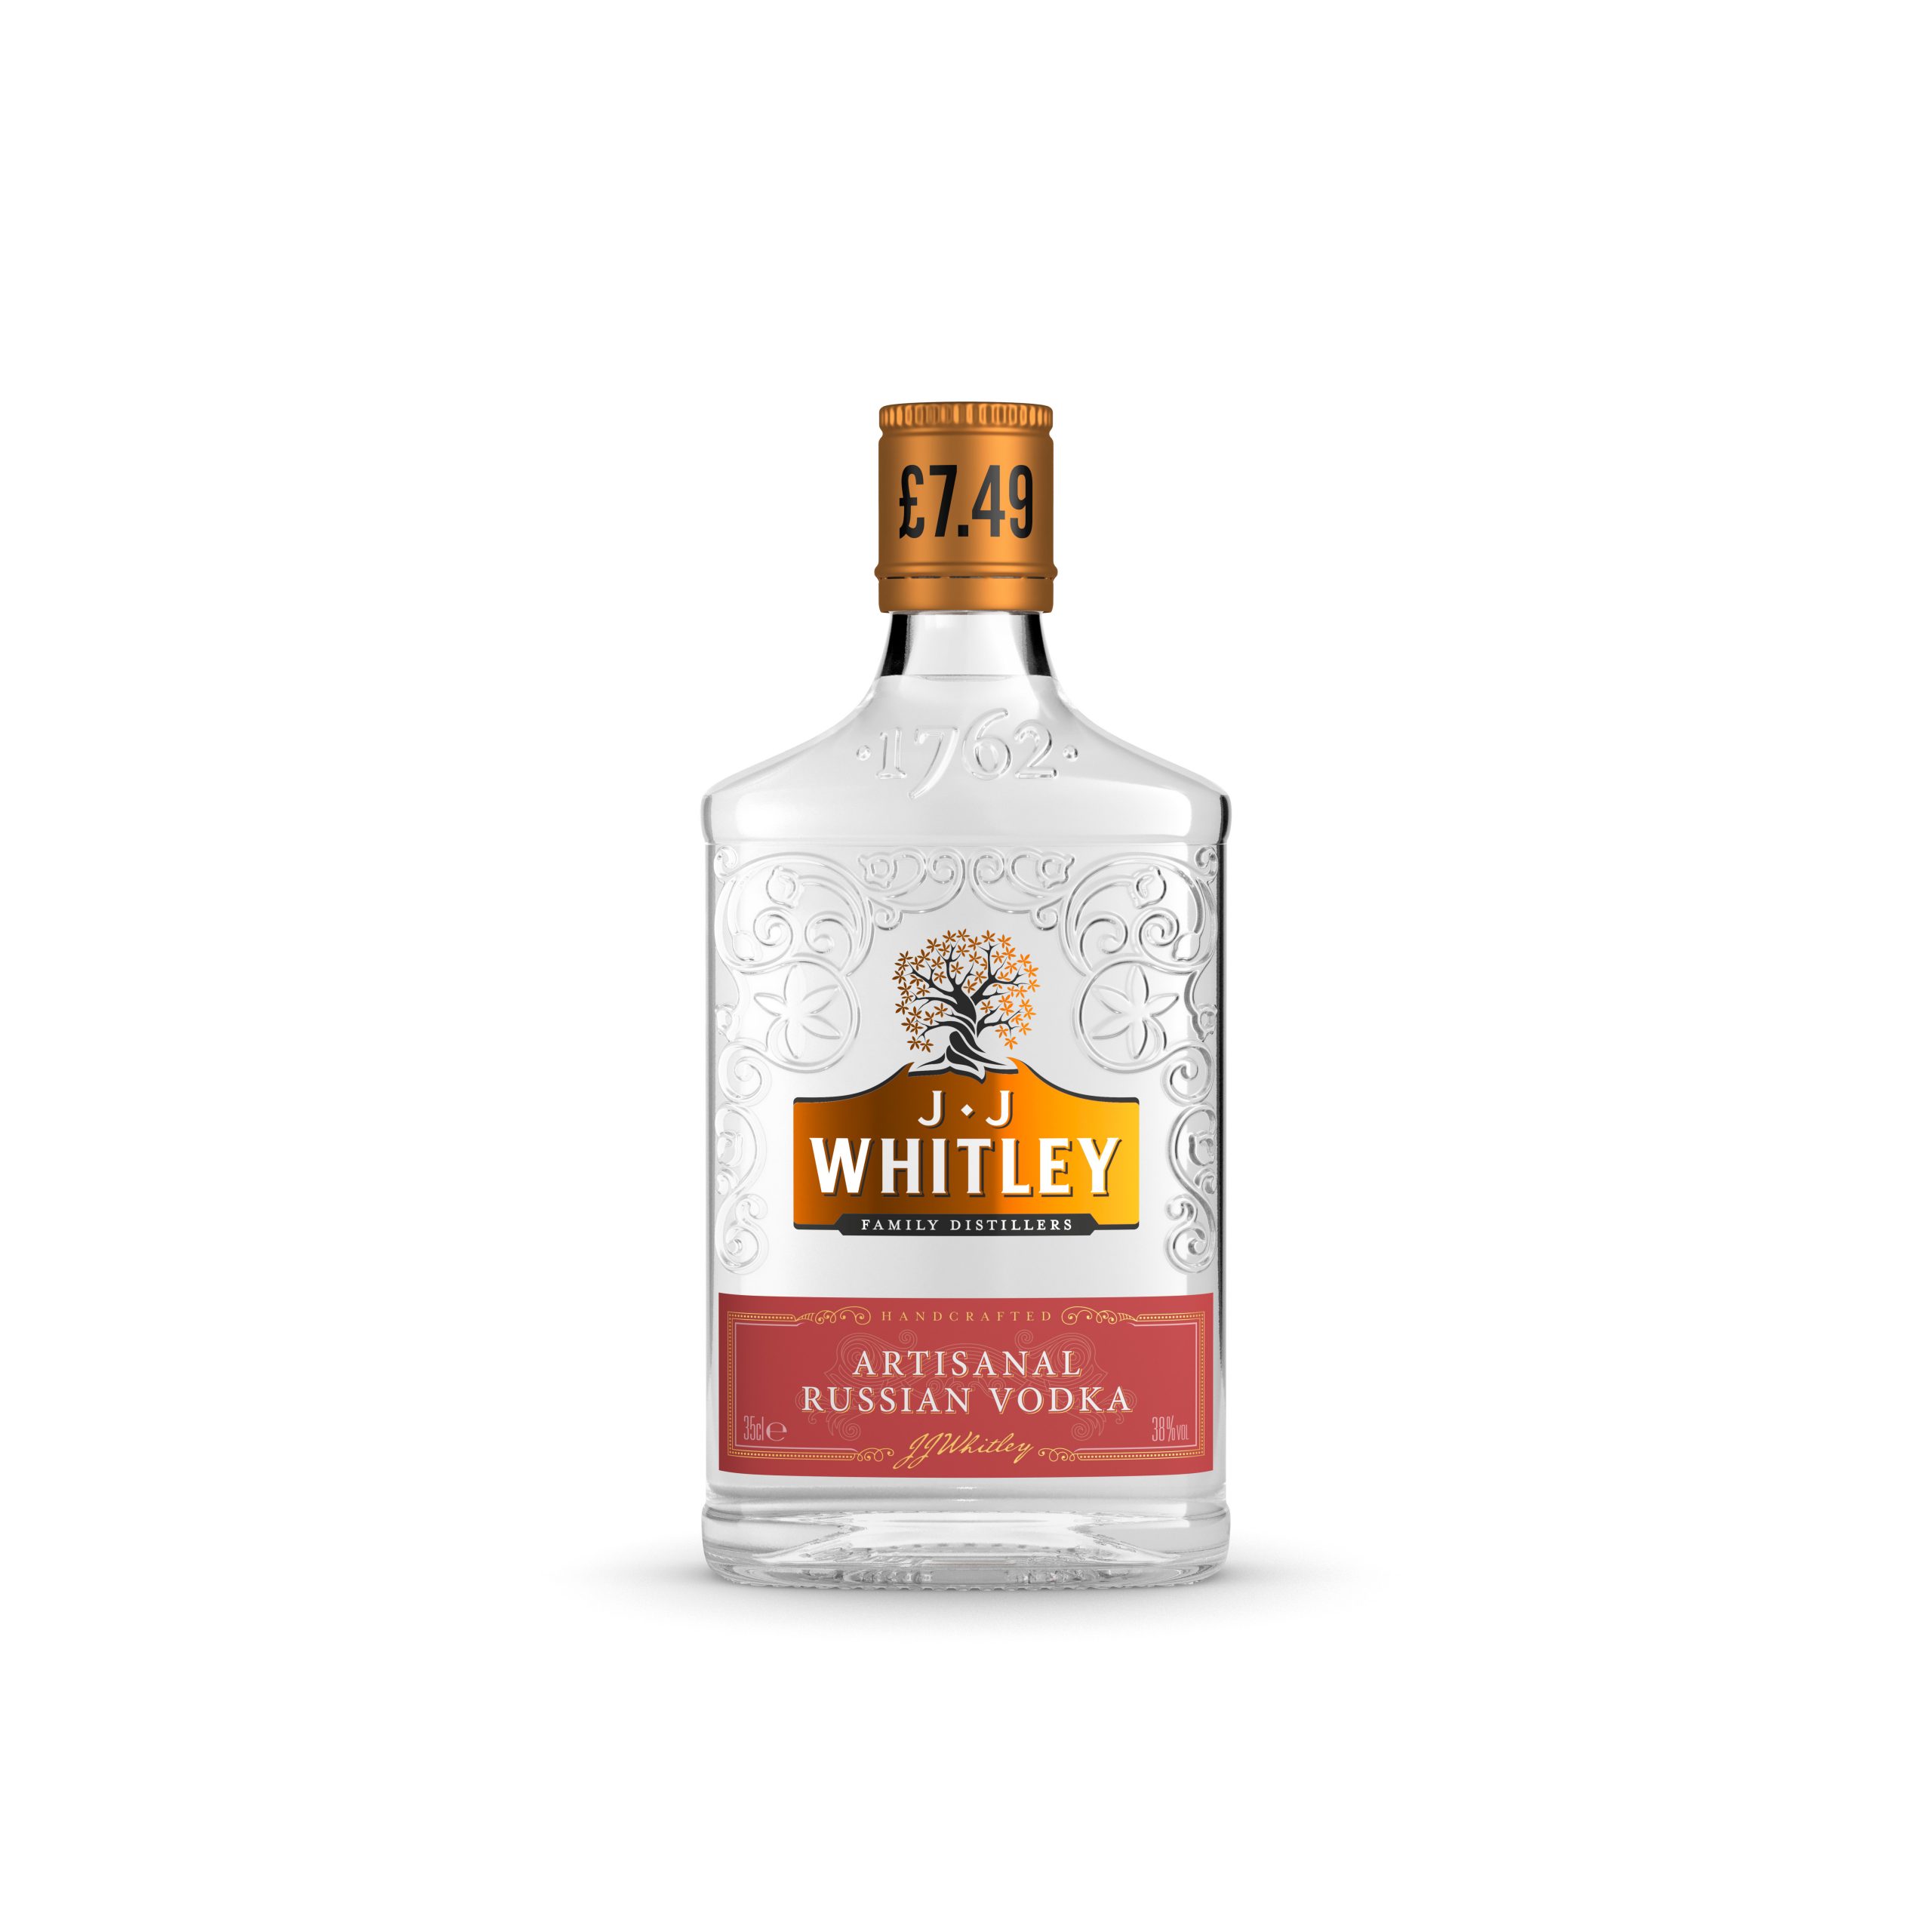 JJ Whitley Vodka extends range with new formats